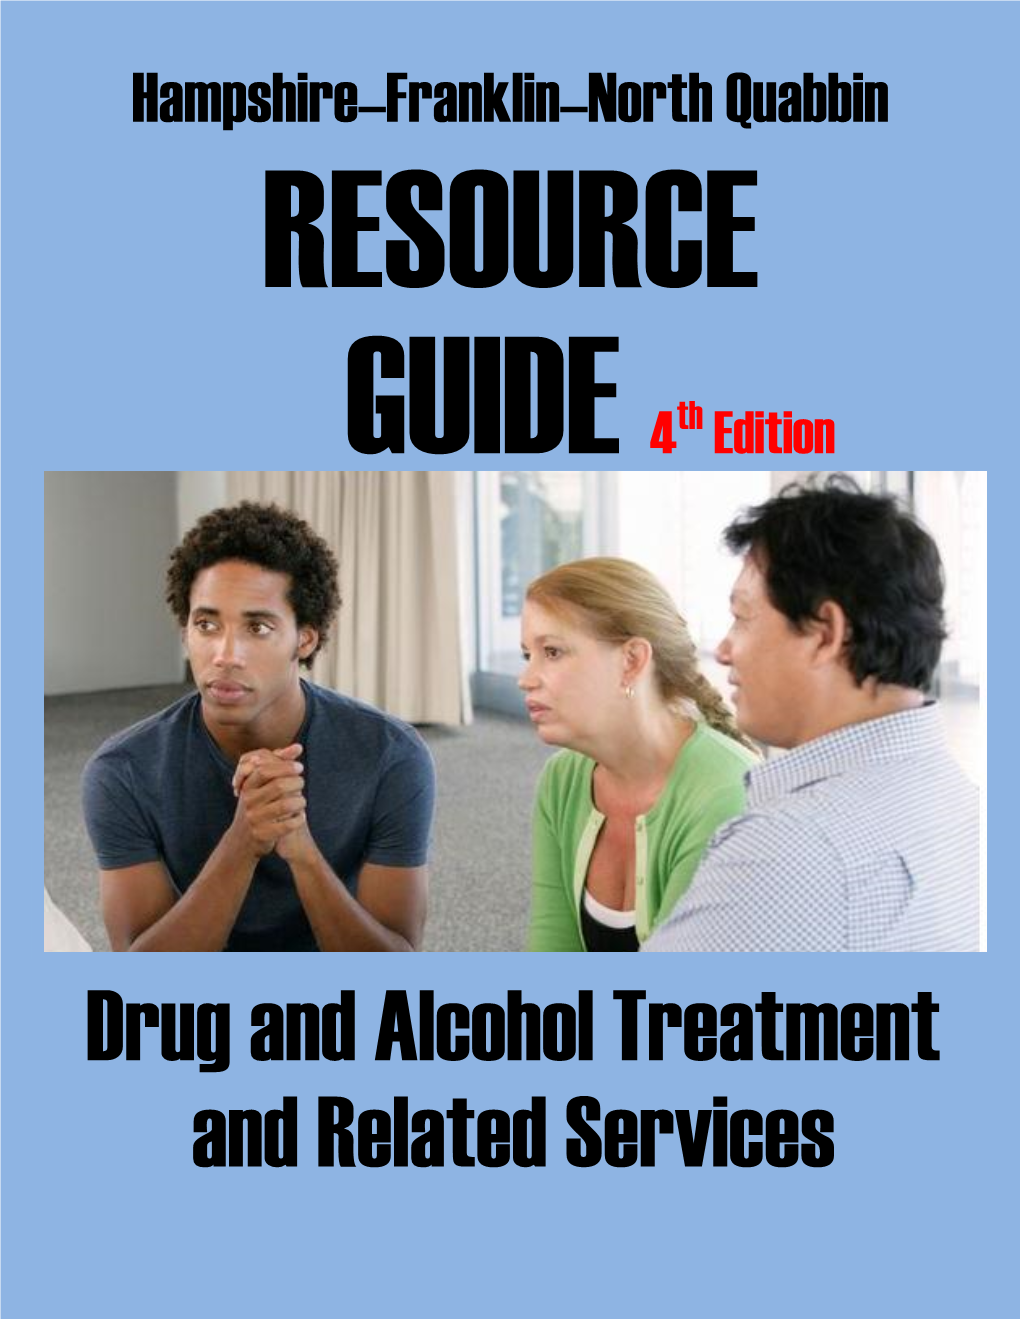 Drug and Alcohol Treatment and Related Services